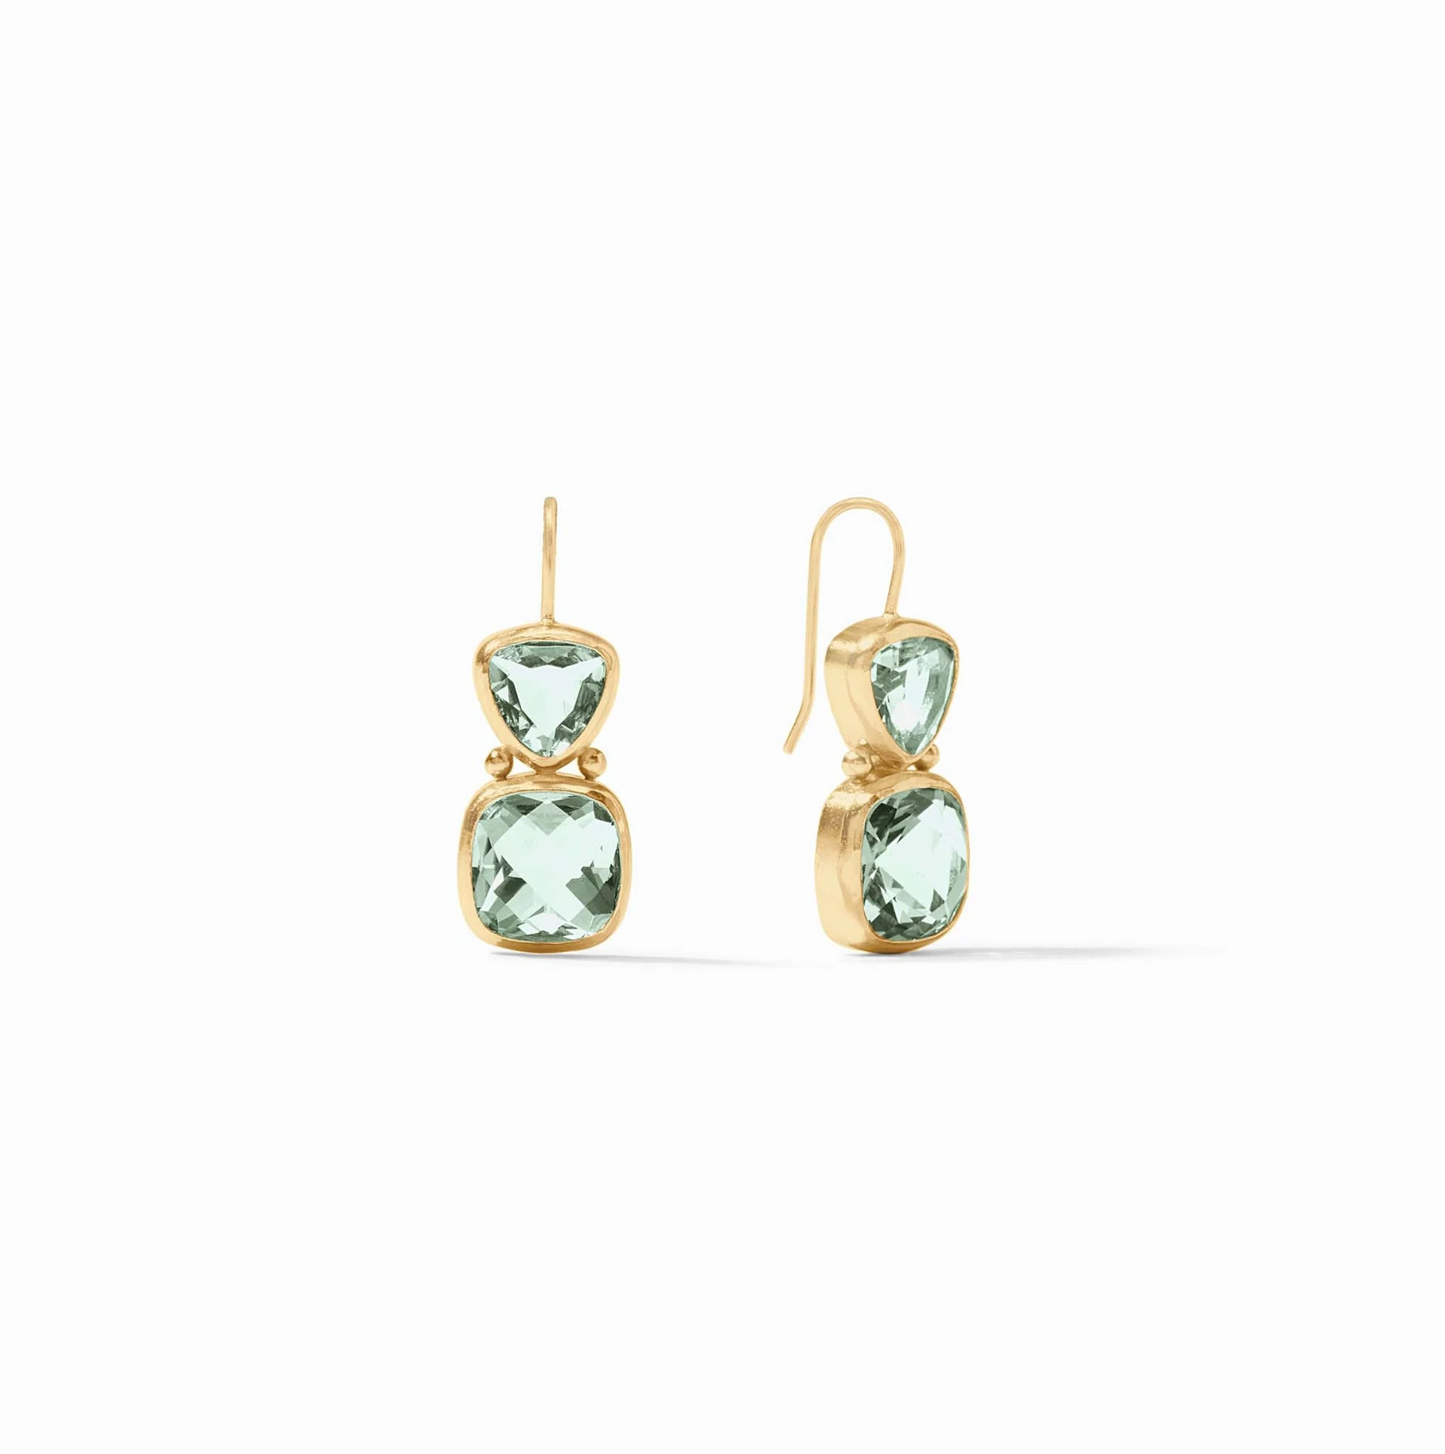 Aquitaine Earring in Aquamarine Blue - The French Shoppe